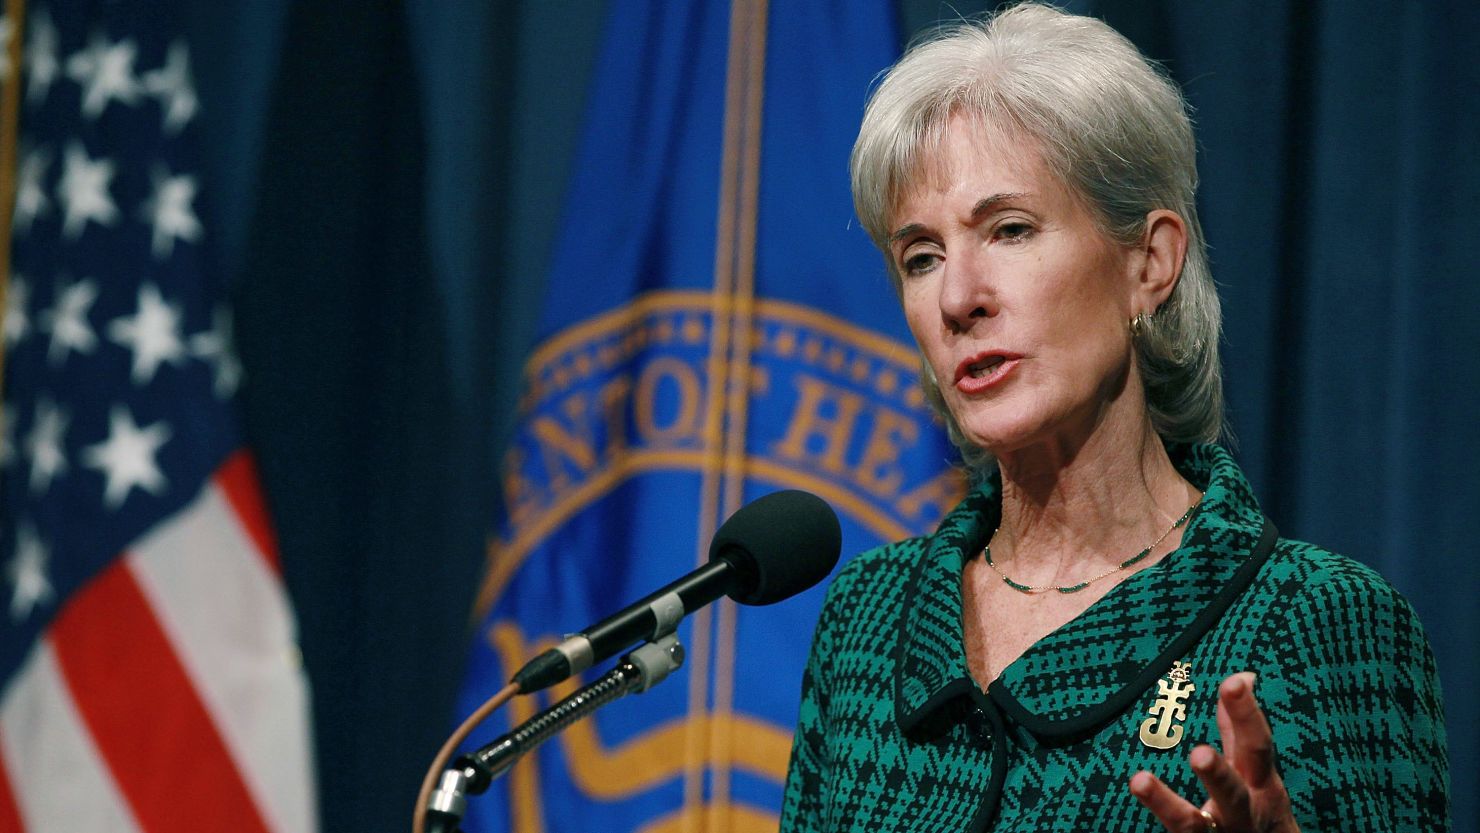 Secretary Kathleen Sebelius overruled an FDA decision that would have made Plan-B contraception available over-the-counter.